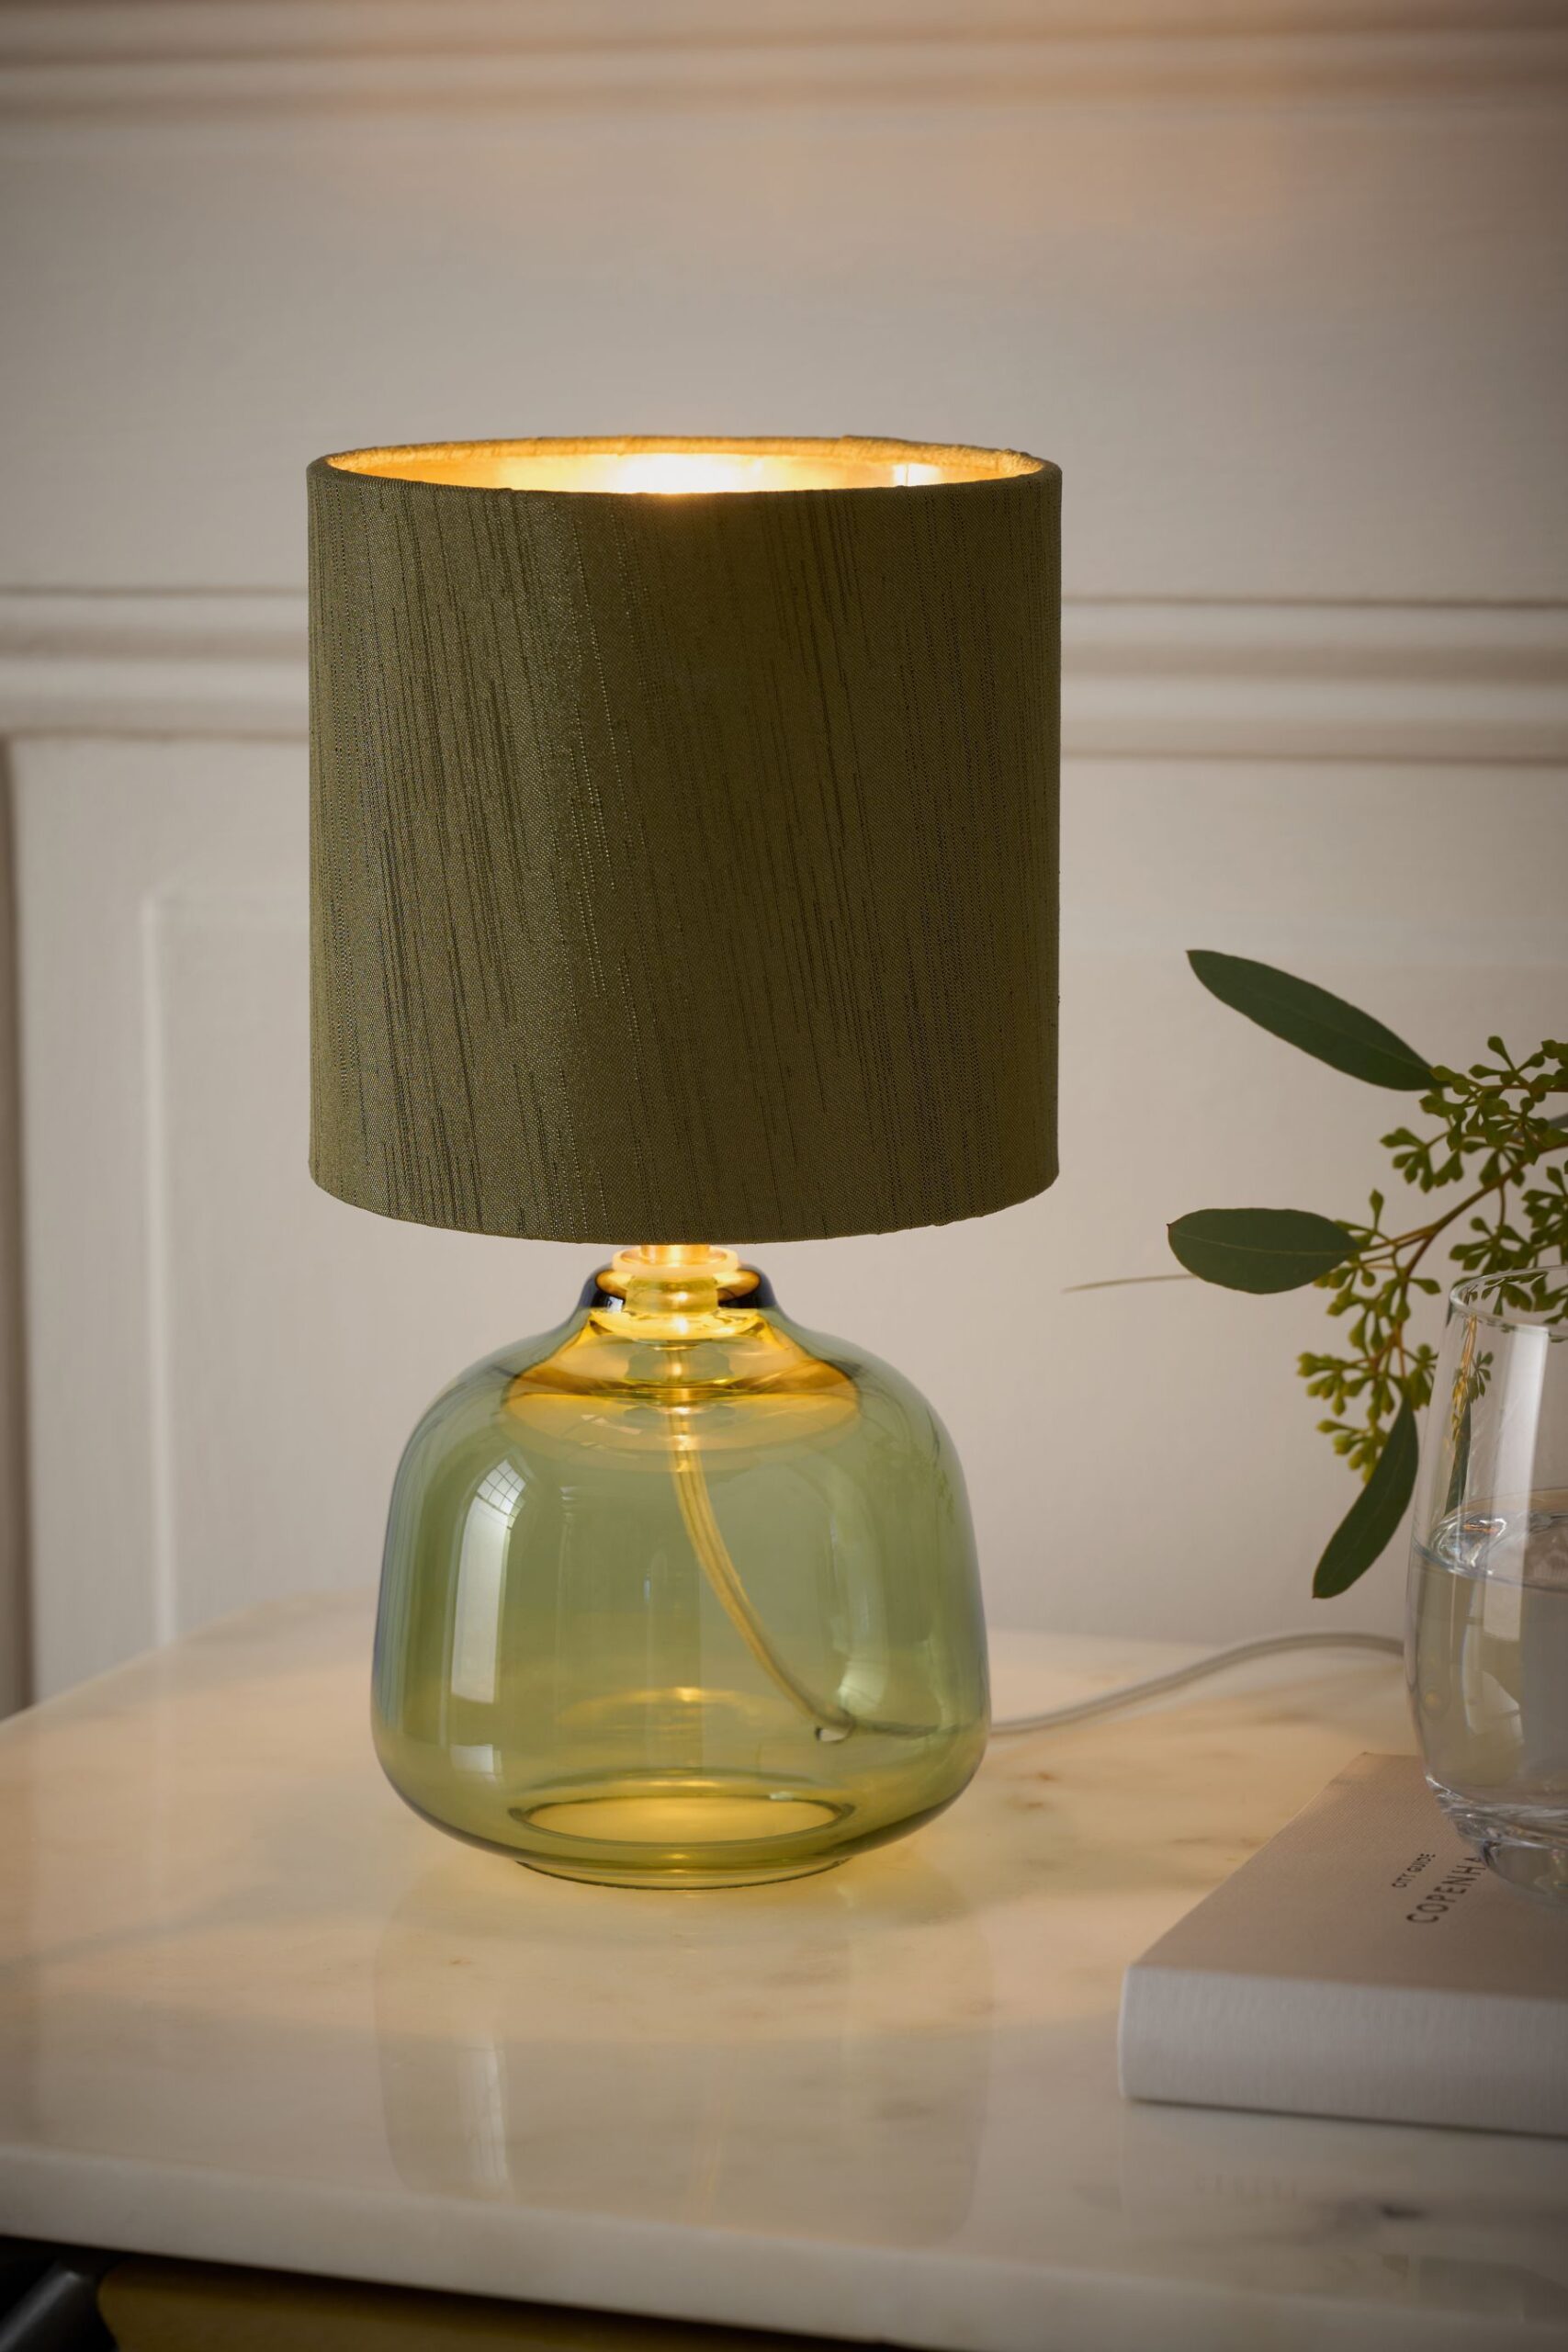 Gbedside Lamps Online : Best Deals on Stylish Bedside Lamps Online for Every Bedroom Décor